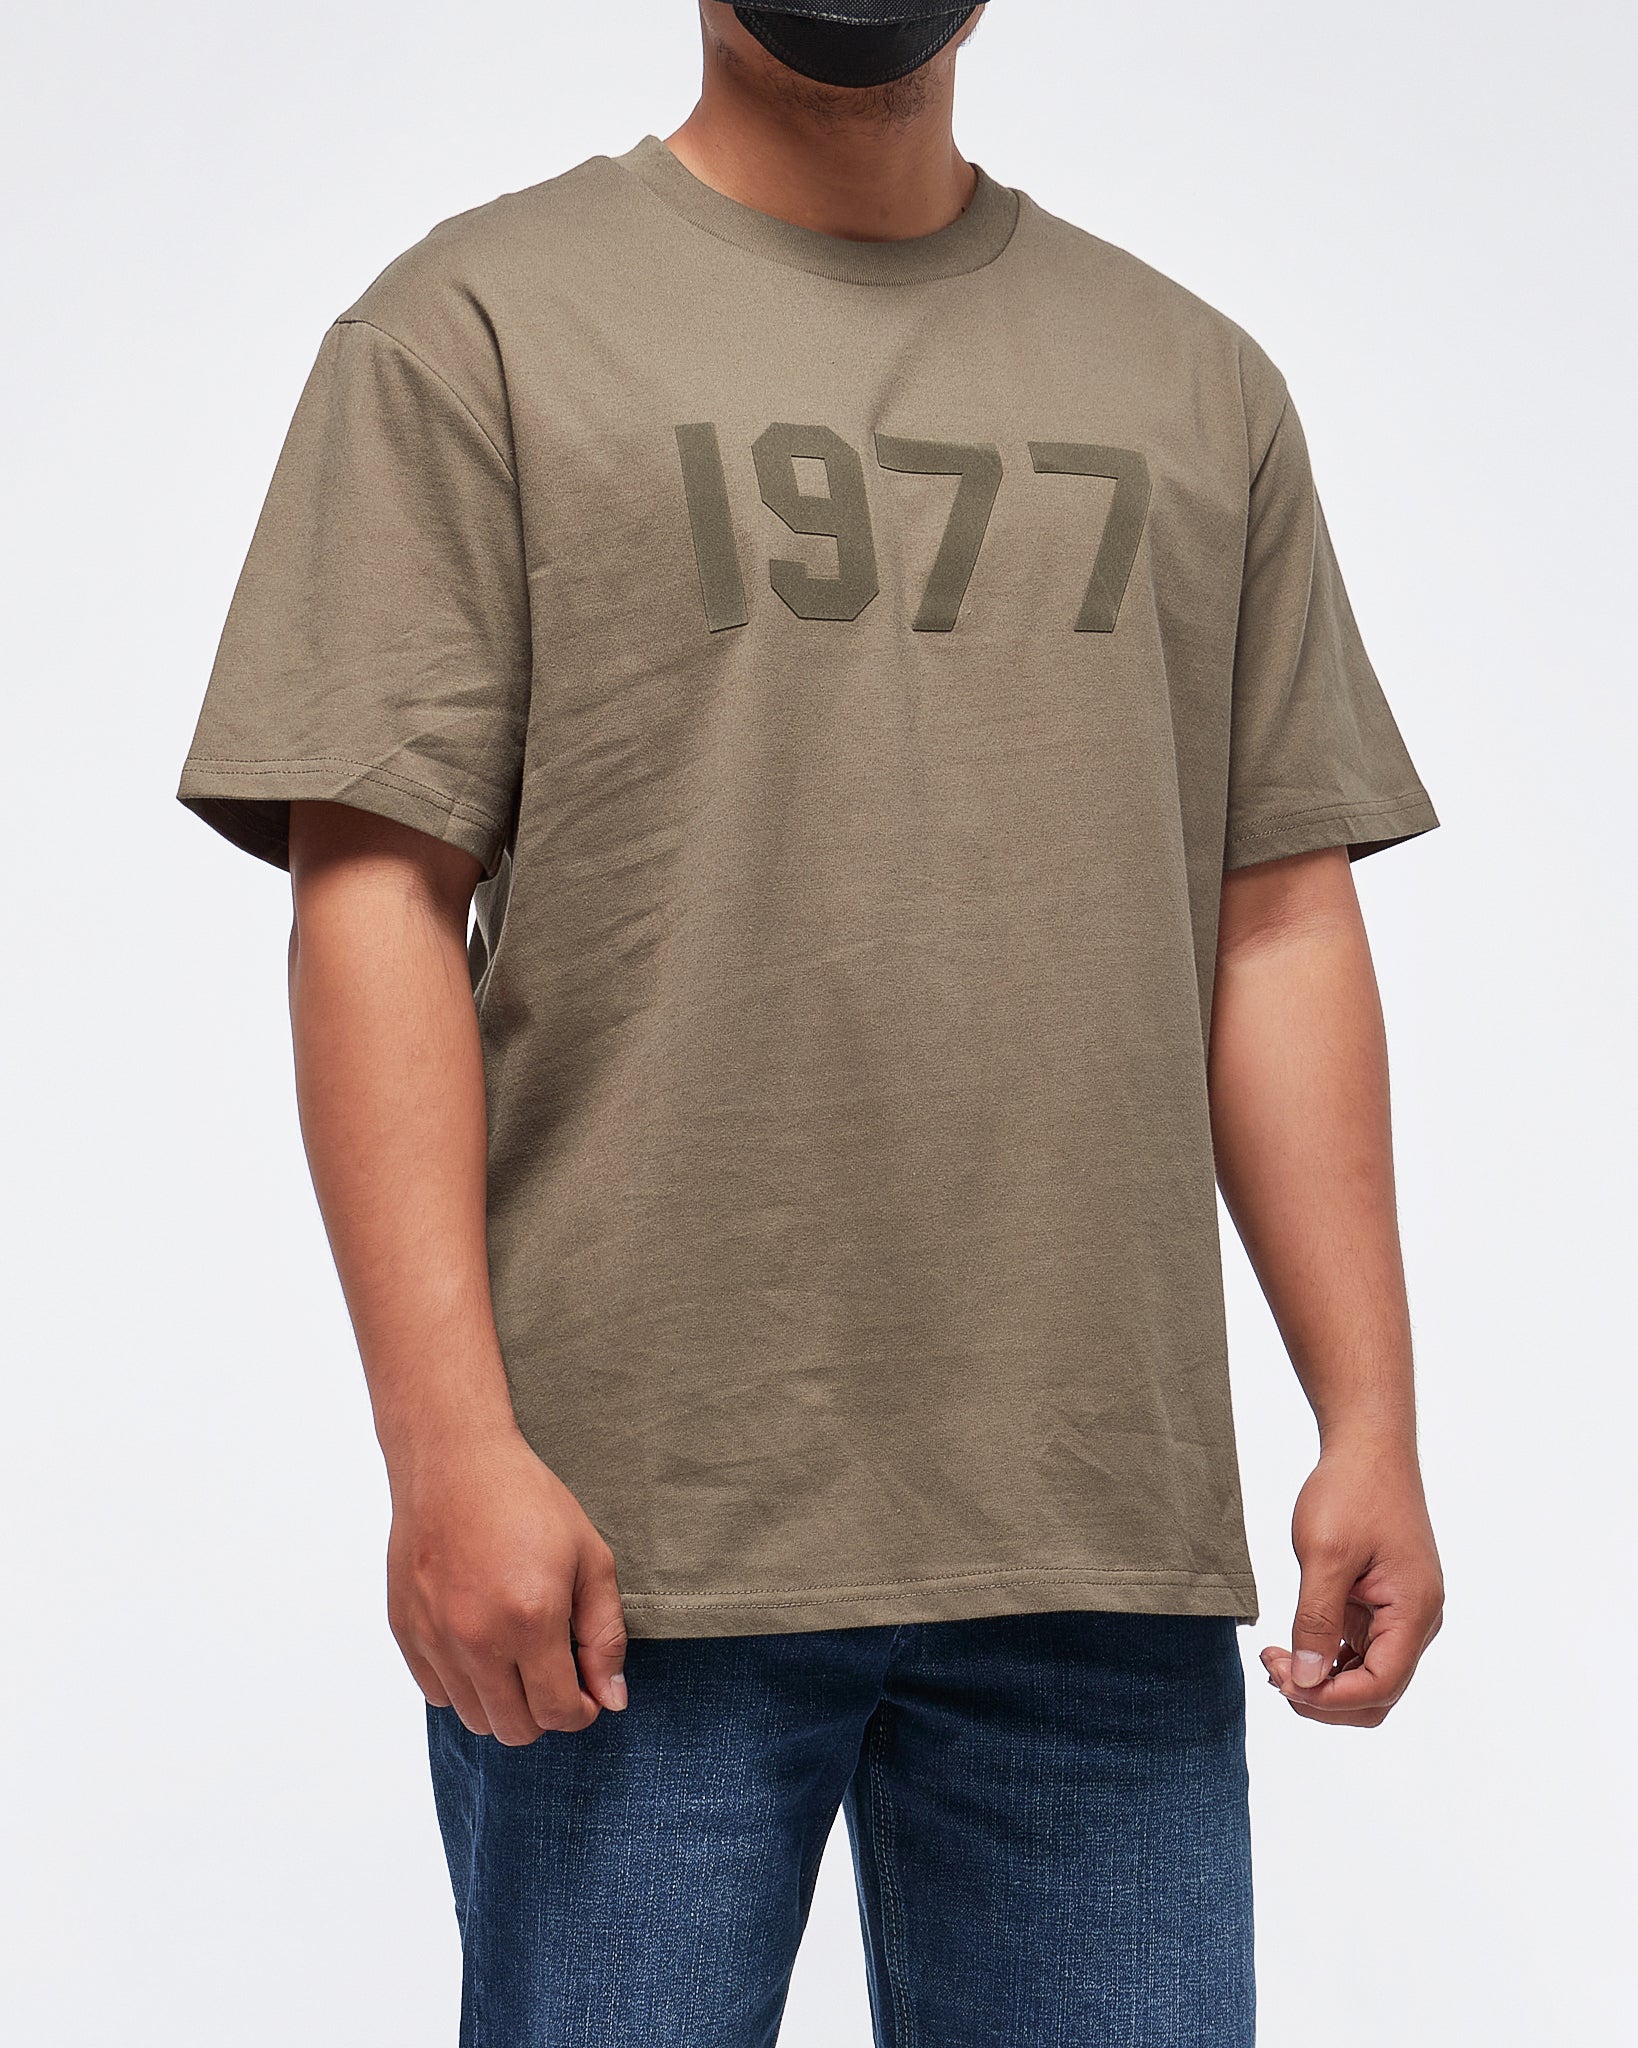 MOI OUTFIT-1977 Printed Men T-Shirt 15.90